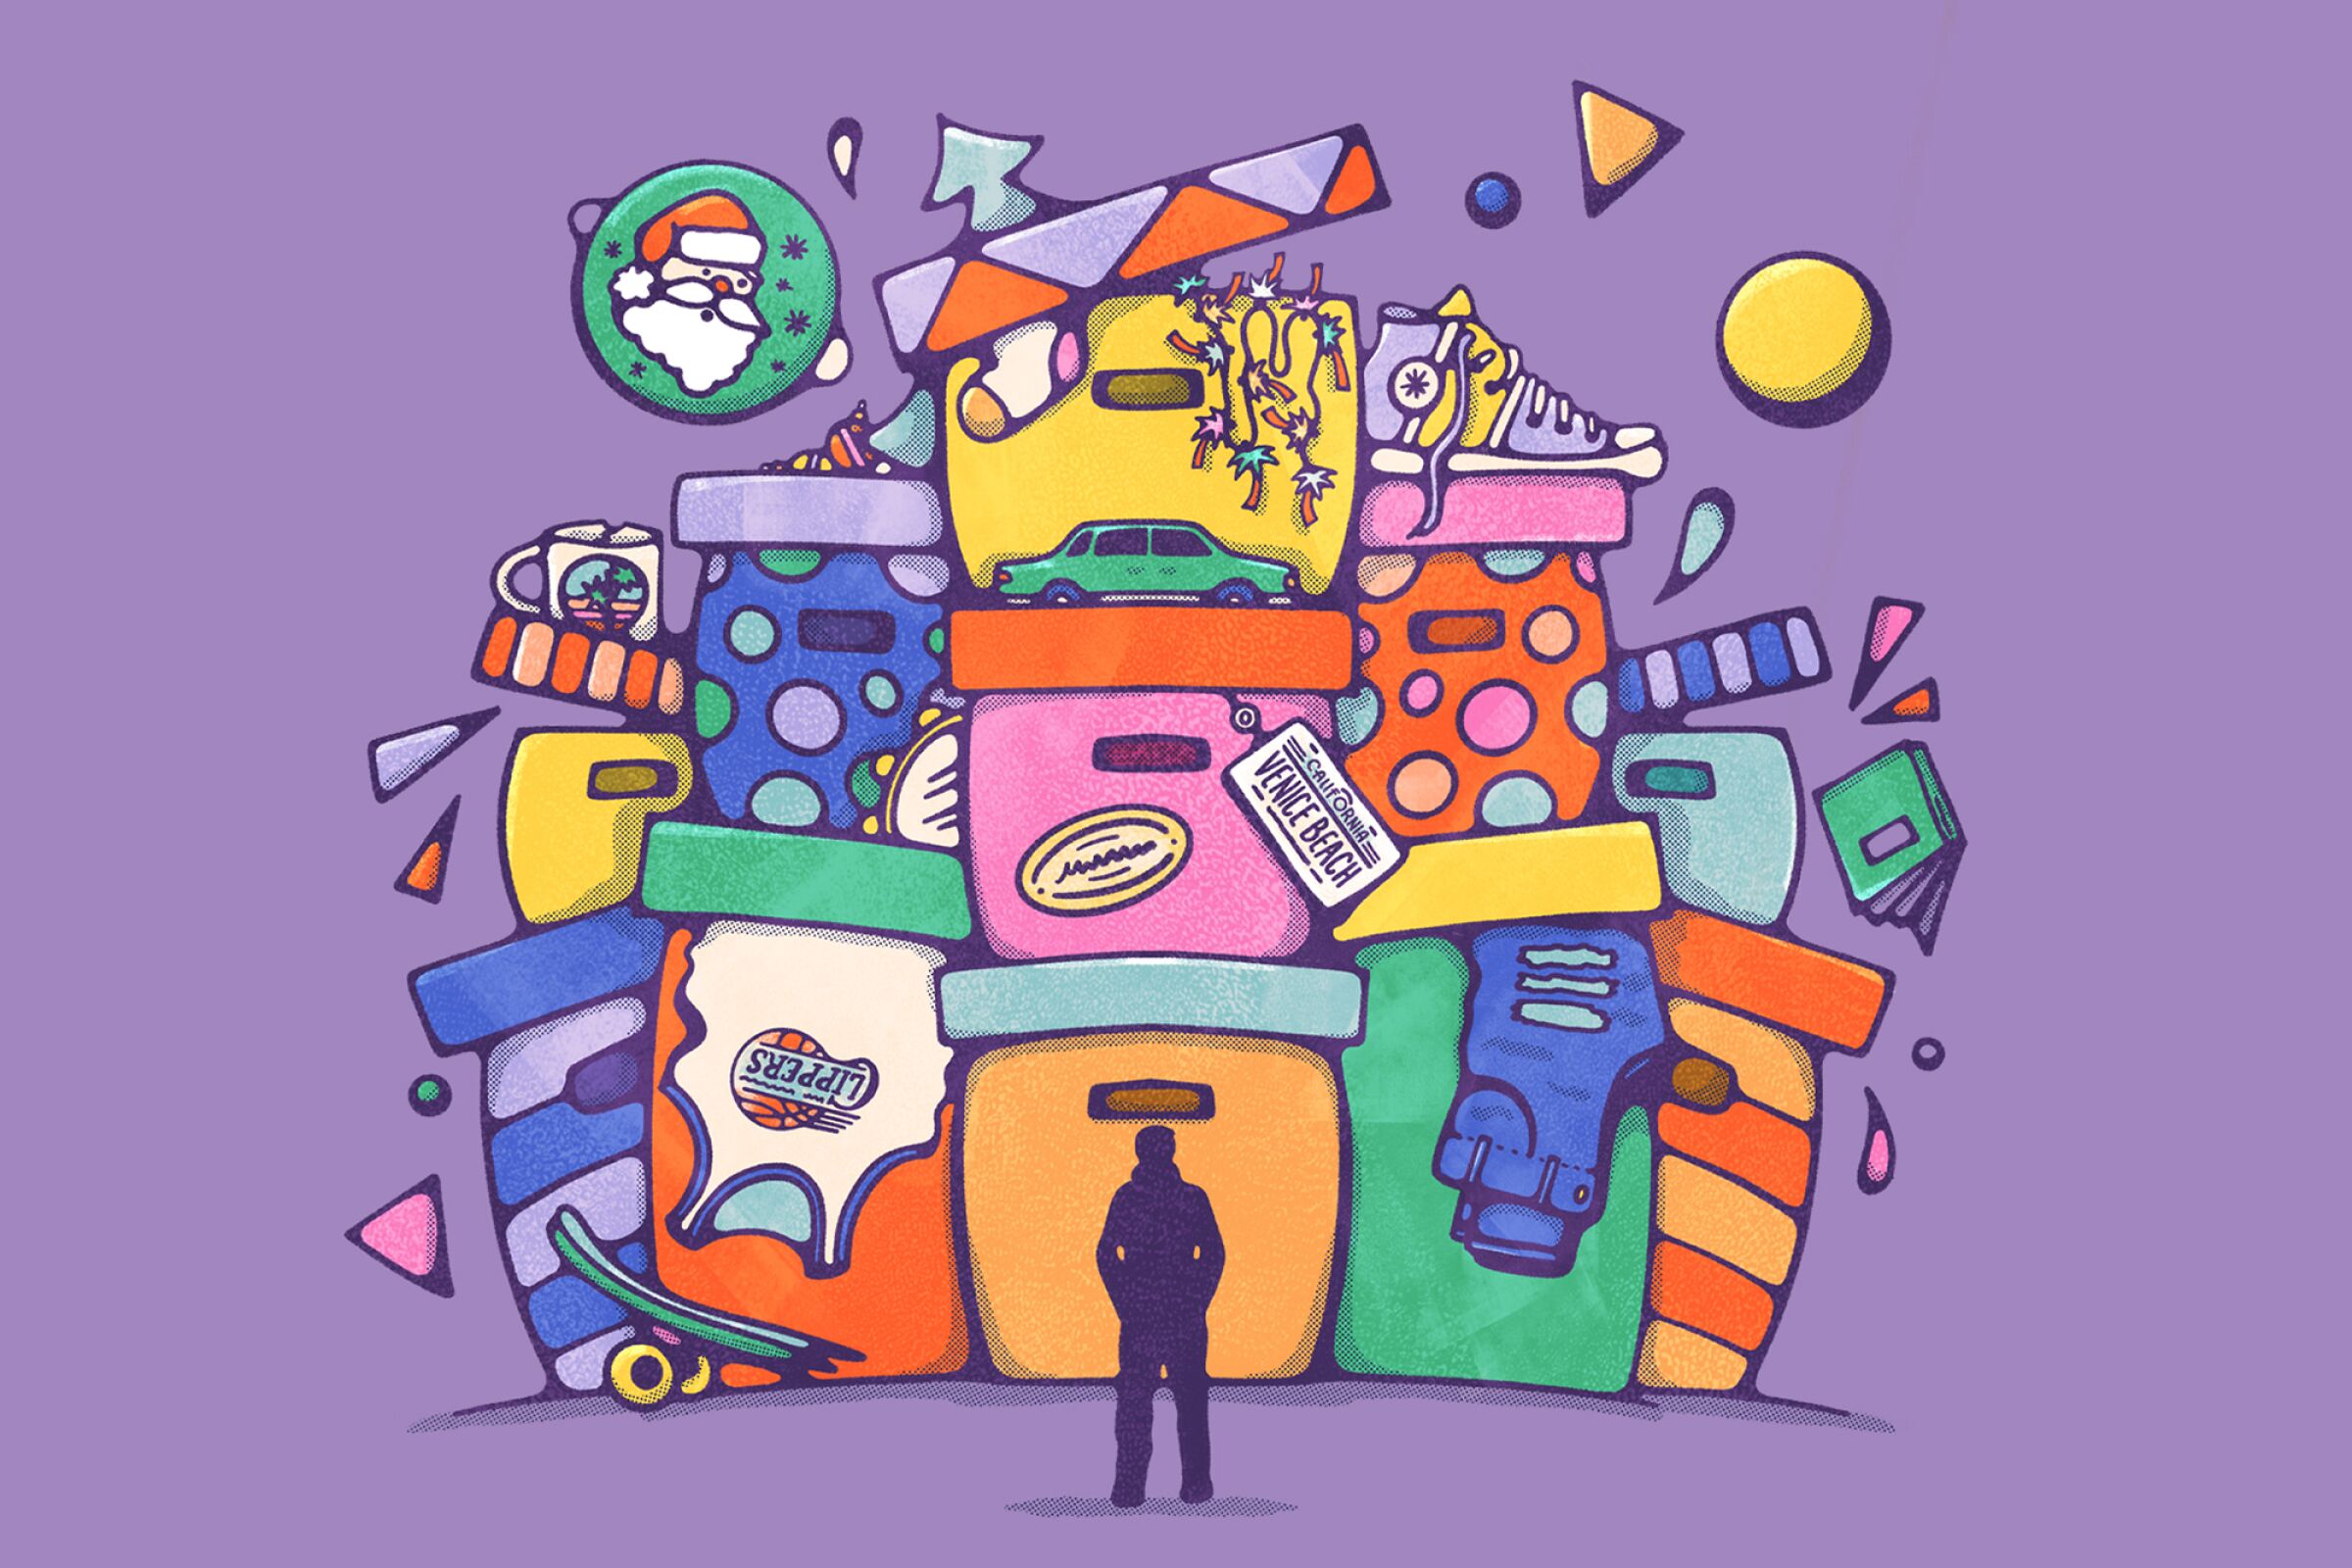 Illustration of a person looking at an overwhelming pile of boxes, bins and other clutter.